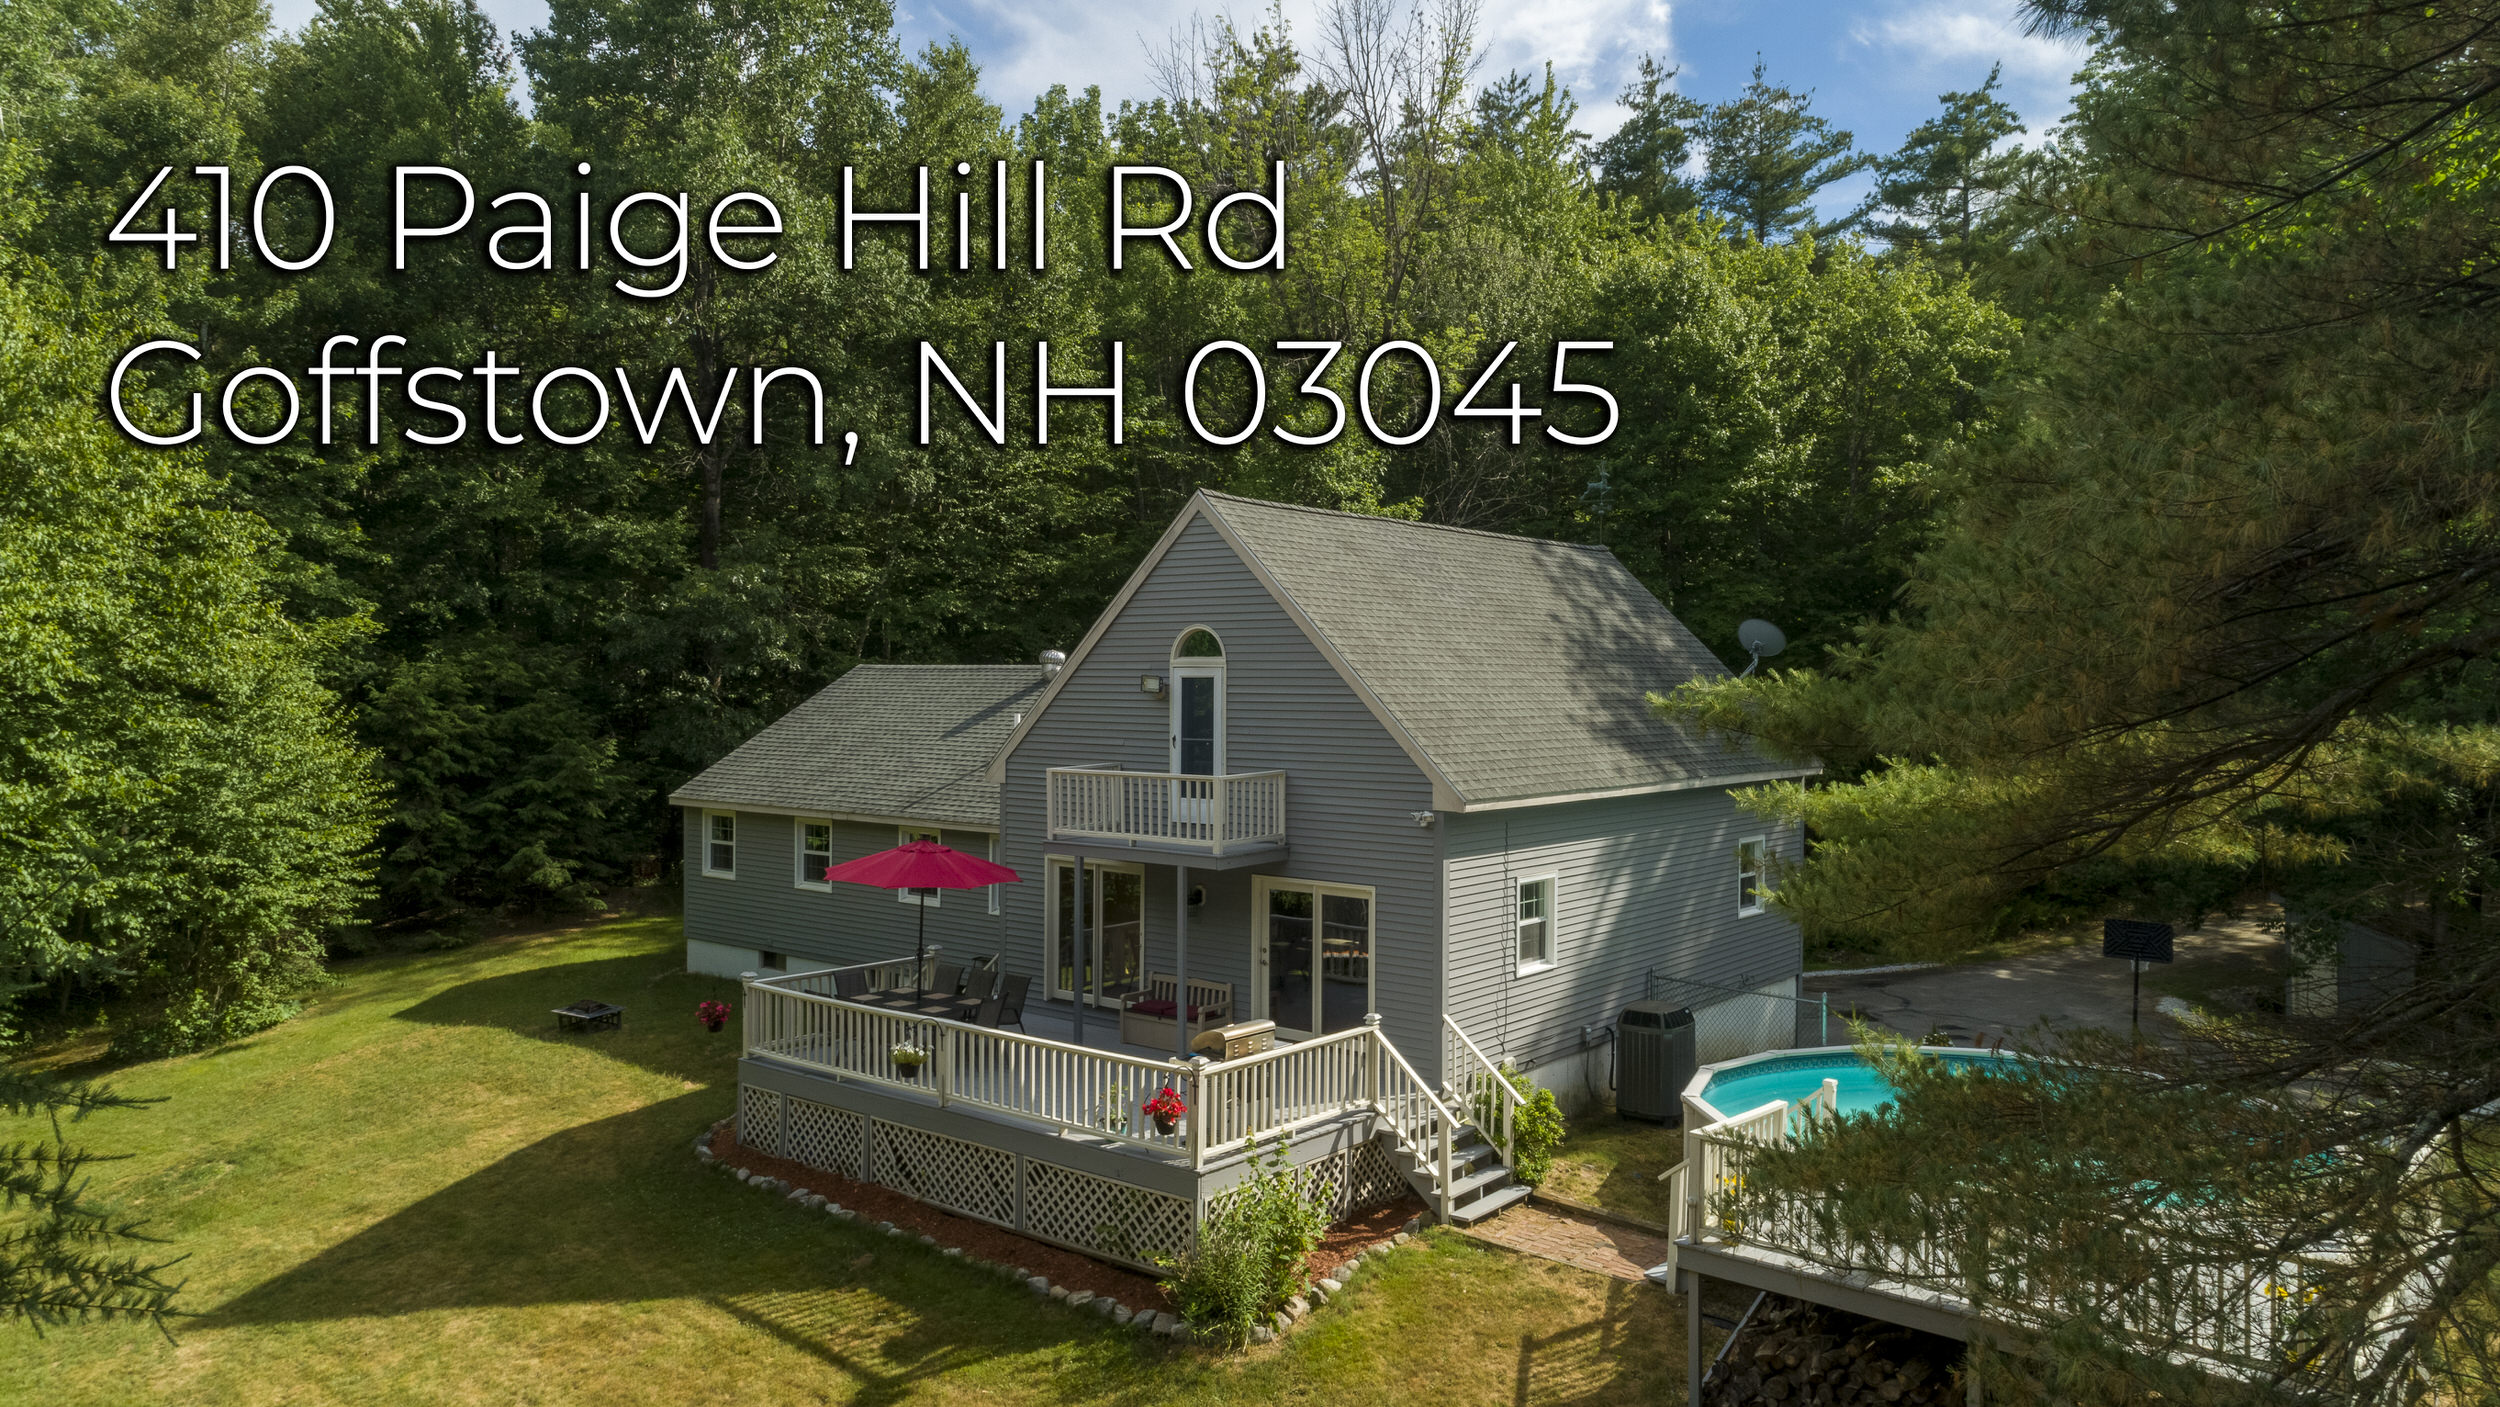 410 Paige Hill Rd Goffstown NH 03045